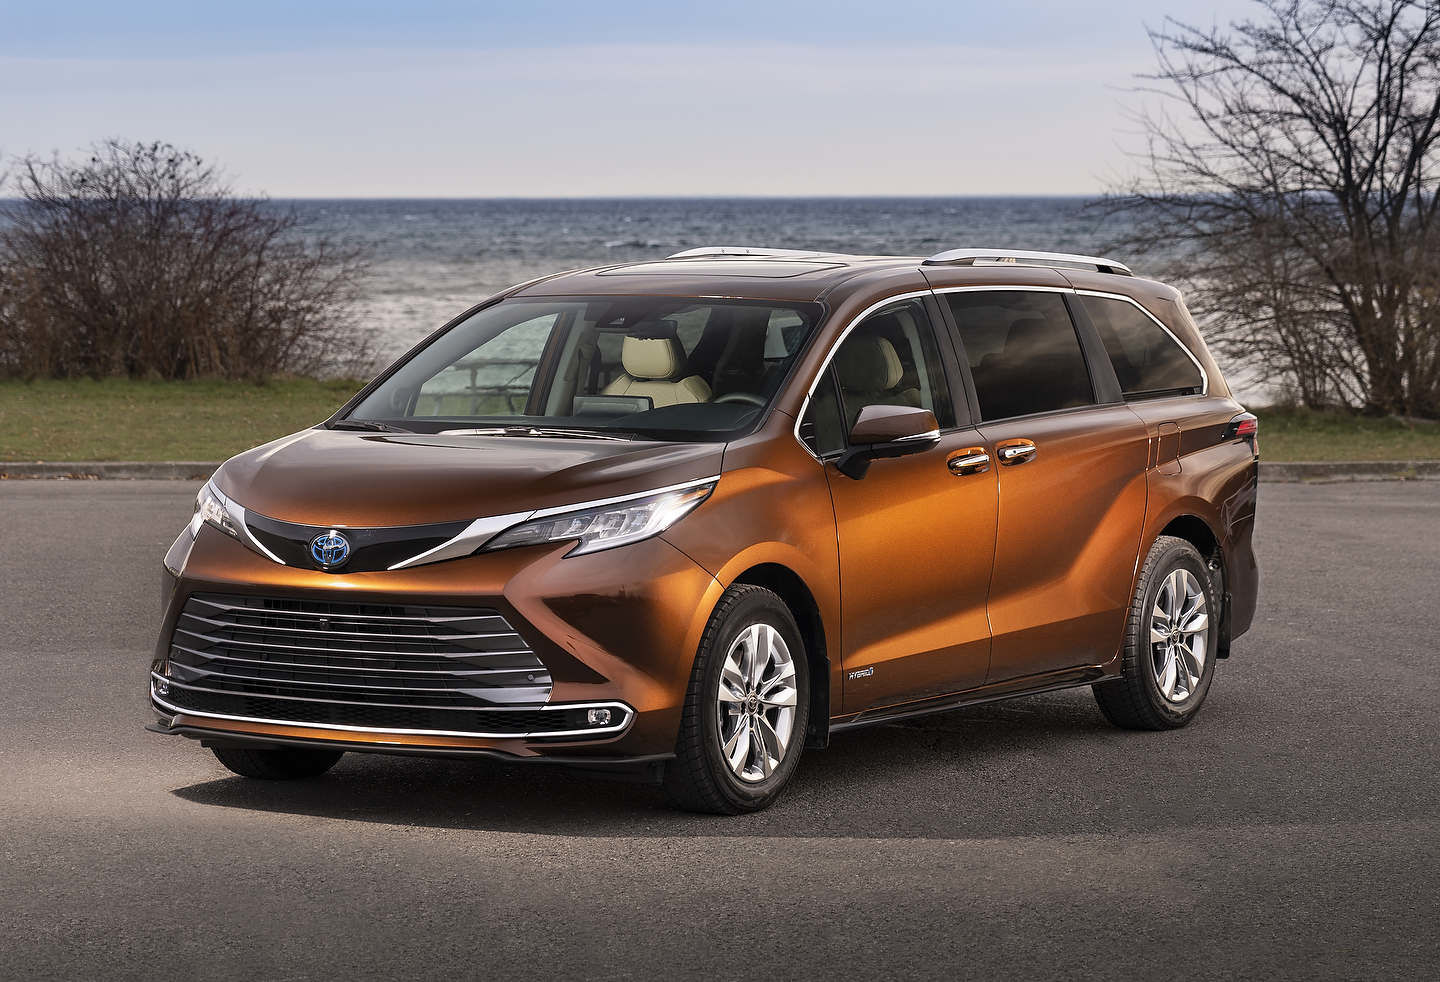 New 2021 Toyota Sienna Delivers Efficiency and Safety at a Great Price